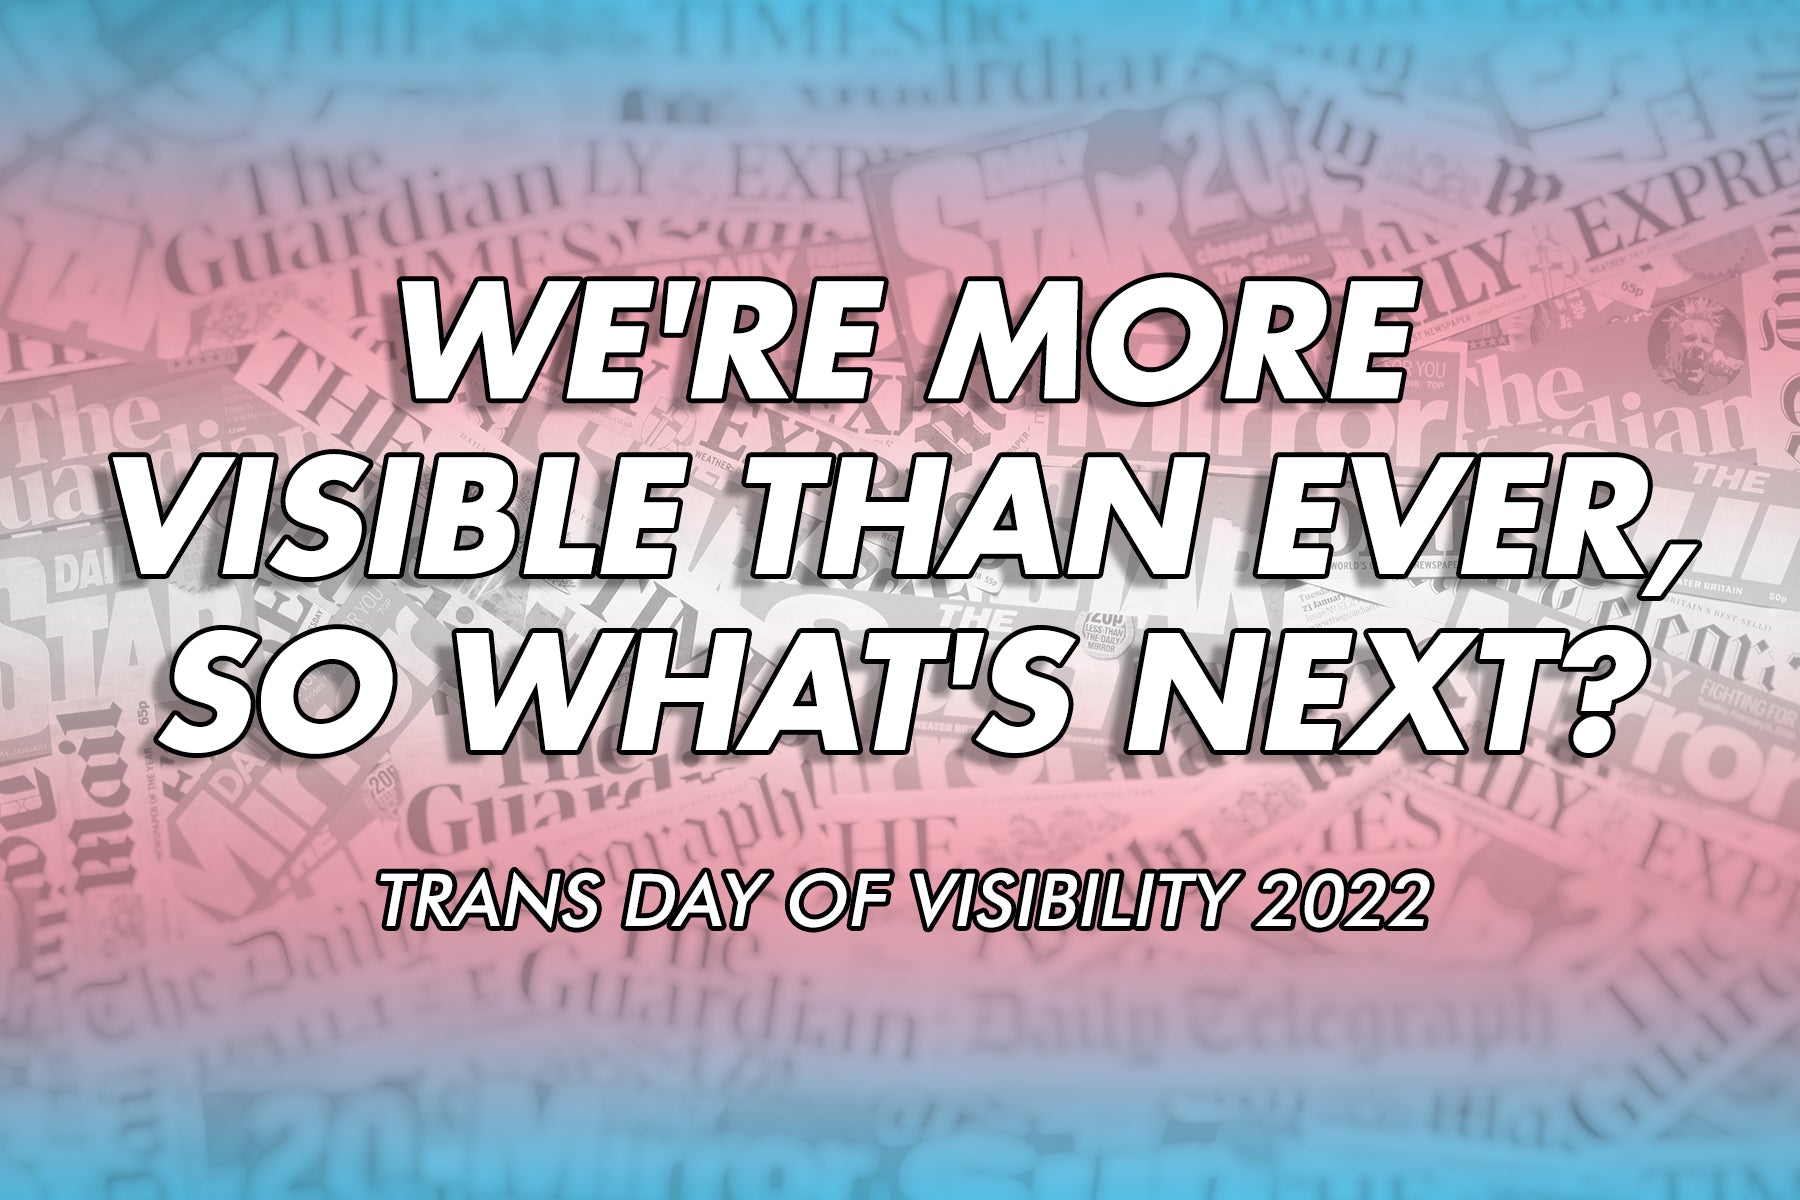 In the background of the image is a collection of British newspaper titles. The colours of the transgender flag lay over them and there is a title which reads 'We're more visible than ever, so what's next?' and a subtitle which read 'Trans Day of Visibility 2022' Credit: lenscap photography / Shutterstock.com